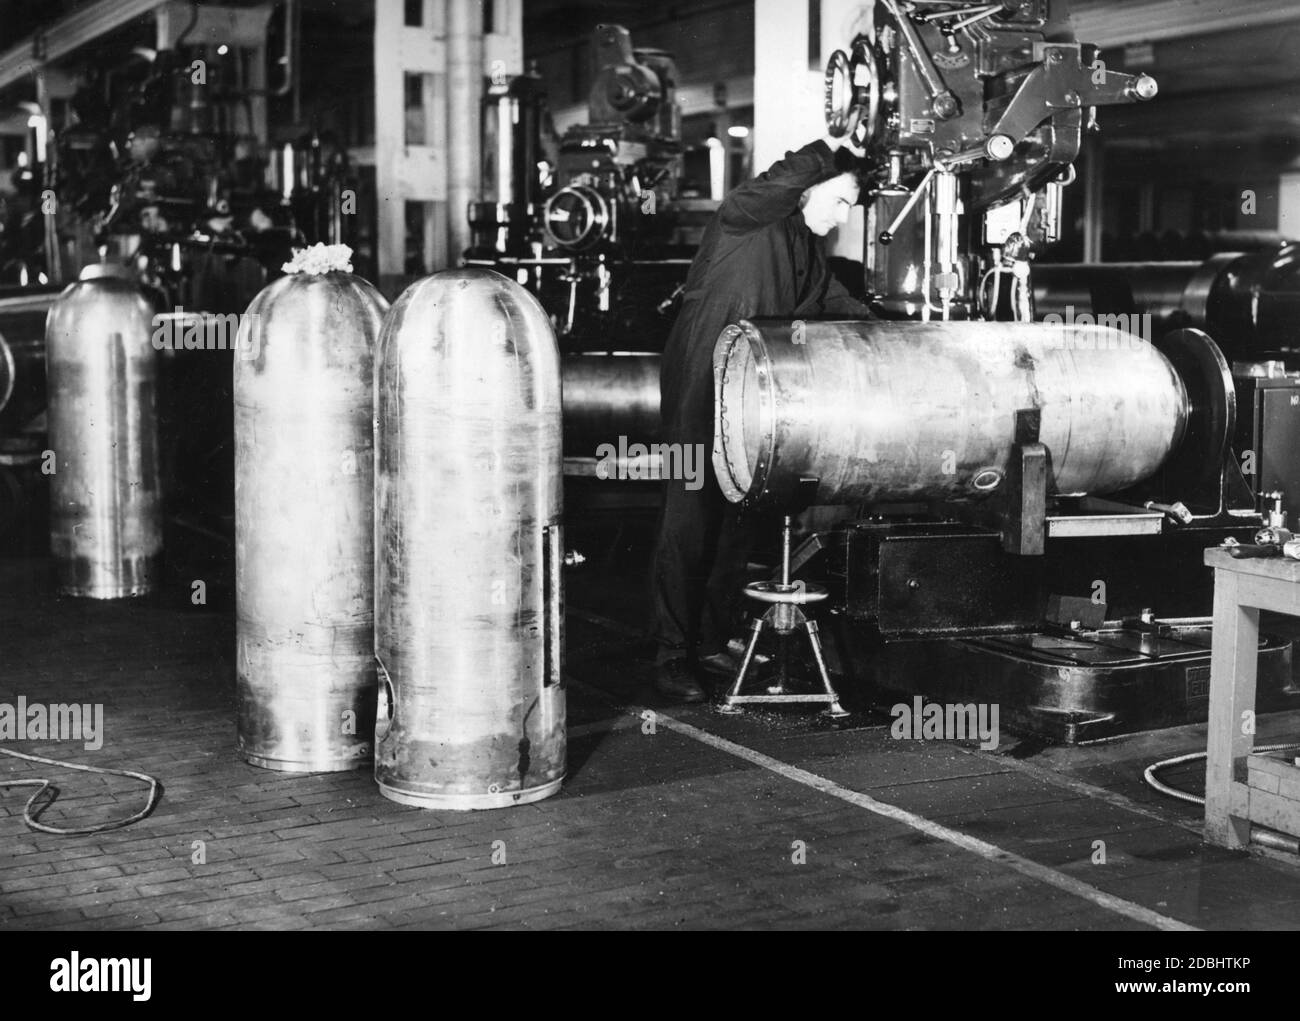 Production of torpedoes for the Royal Navy in an armament factory in England. Stock Photo